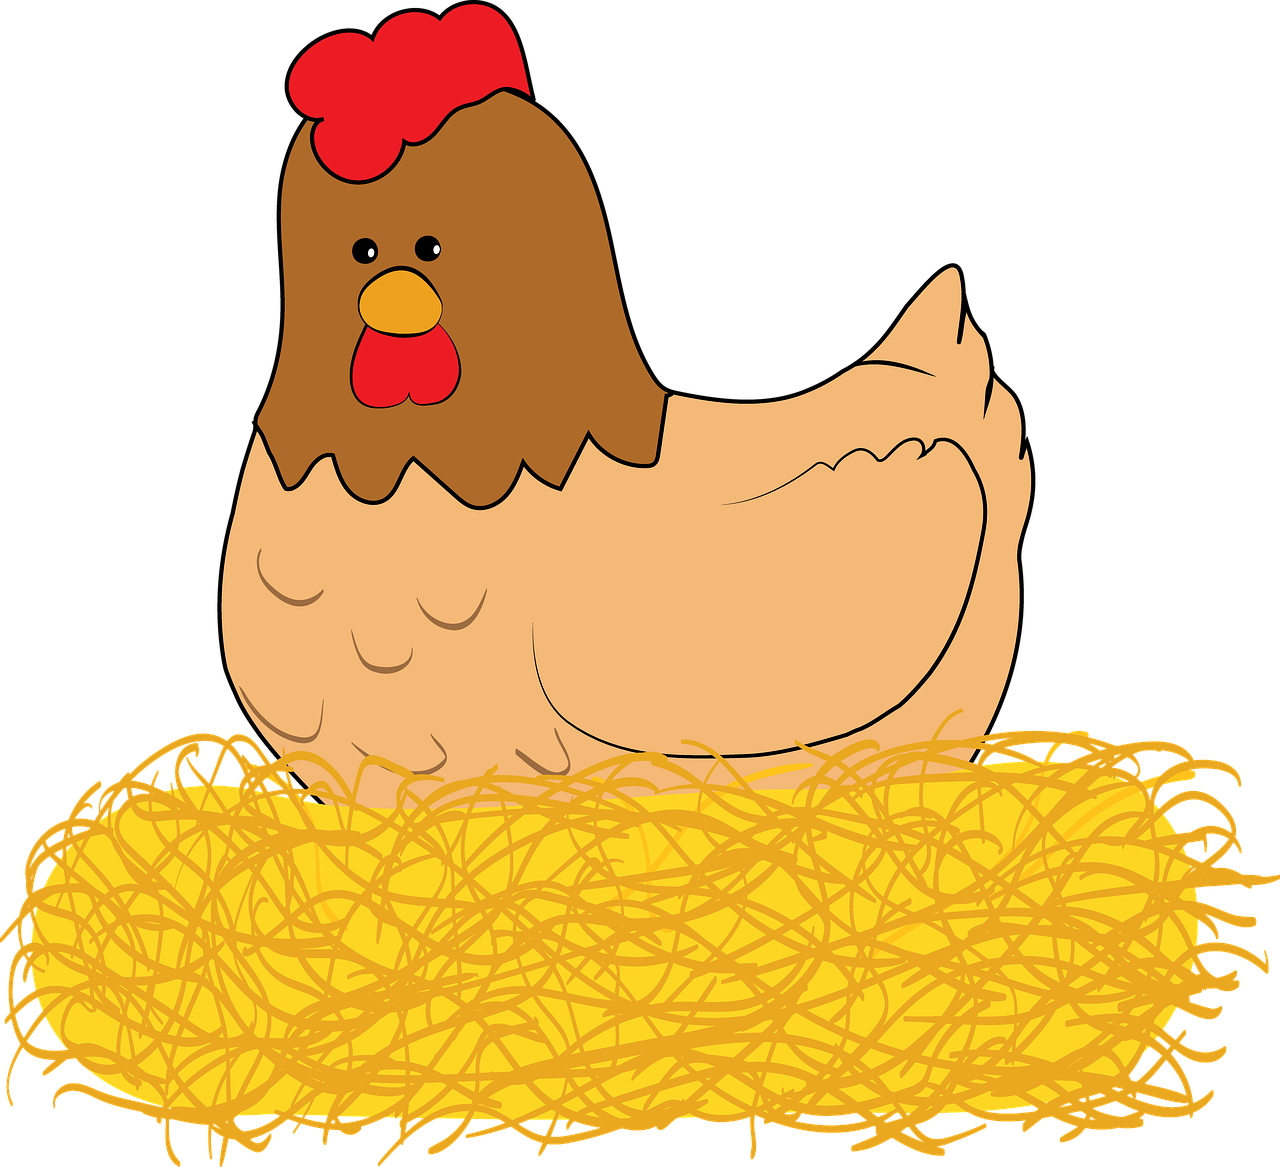 a chicken sitting on top of a pile of hay, an illustration of, naive art, on black background, illustration:.4, an illustration, thick neck